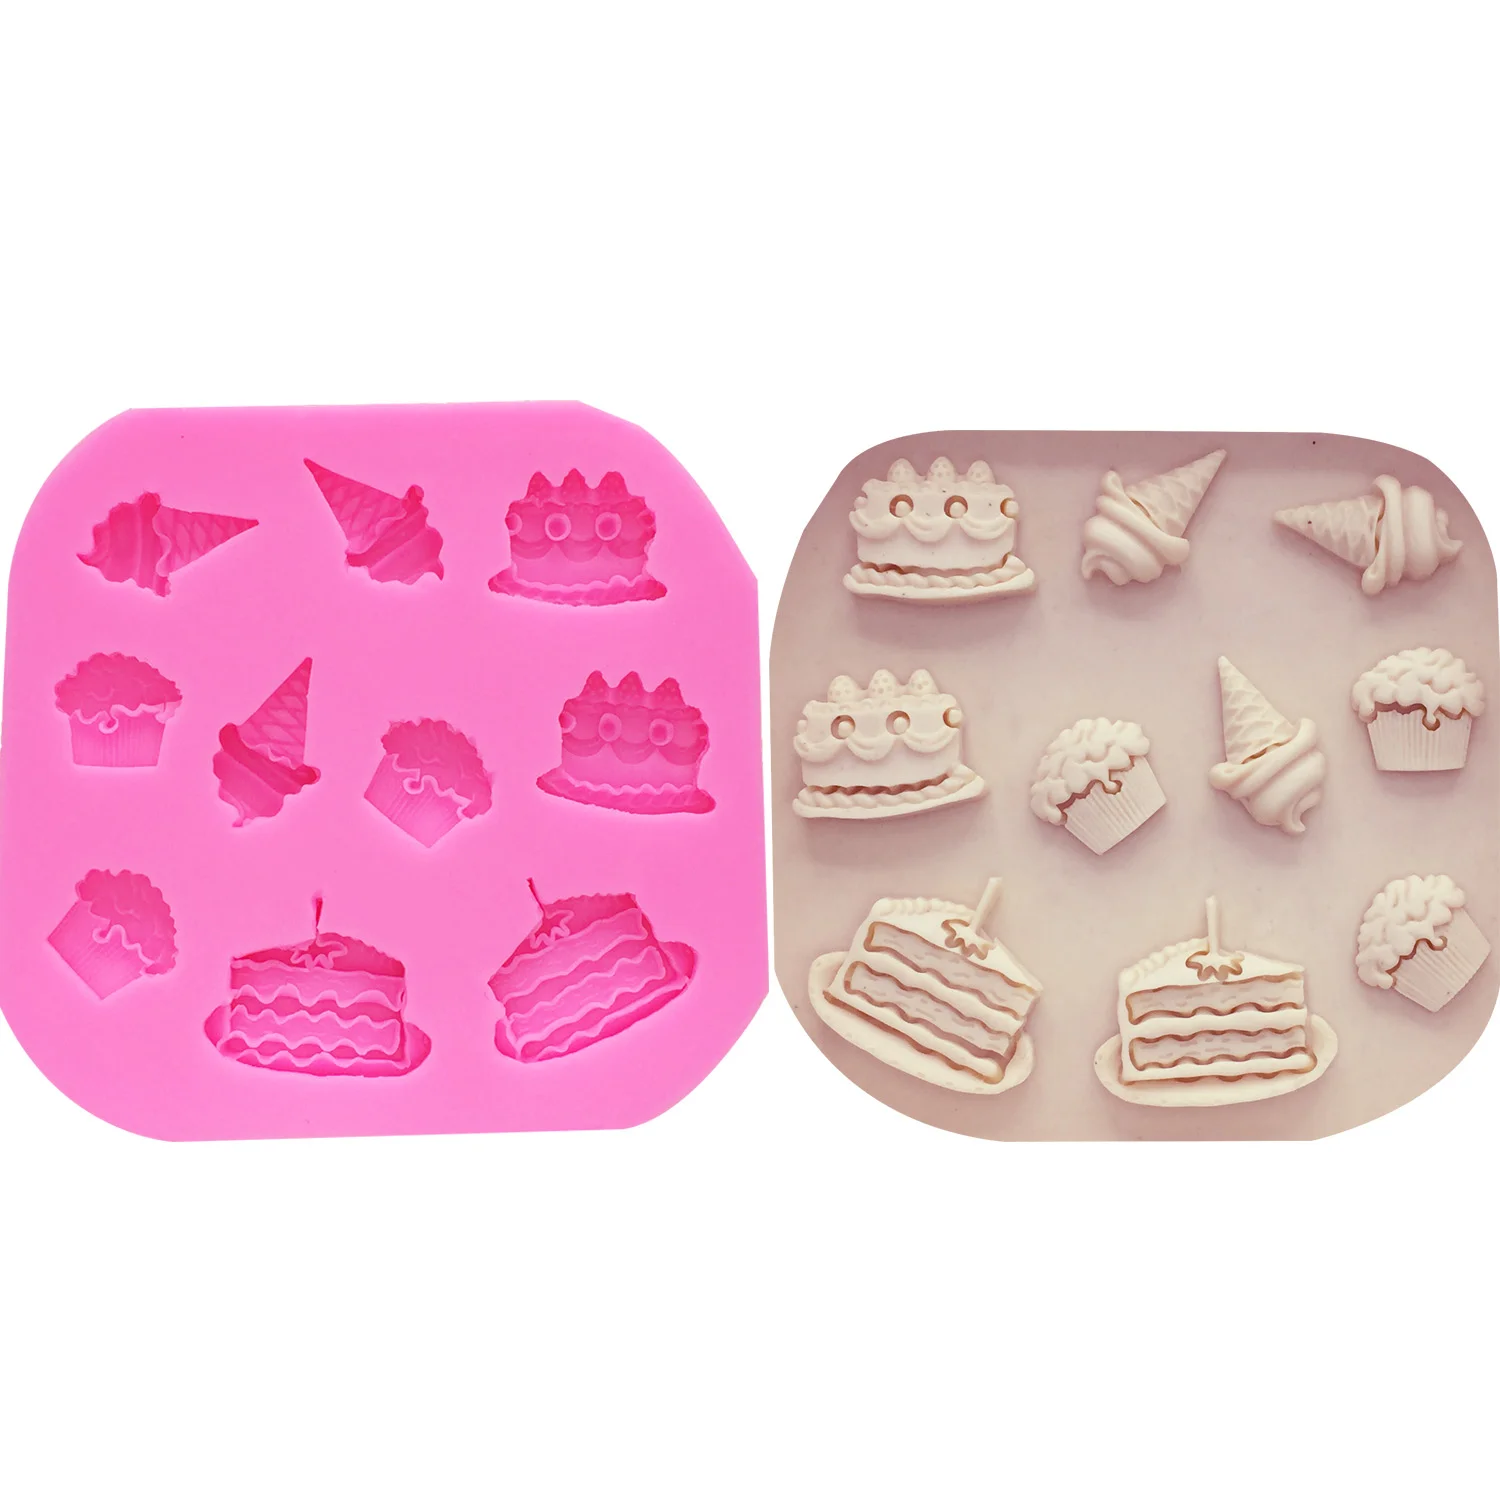 

3D Cake Ice Cream Shape Chocolate Silicone Mold Cooking Tool Silicone Mold DIY Fudge Decoration Tool Food Grade Silicone Mold, Pink